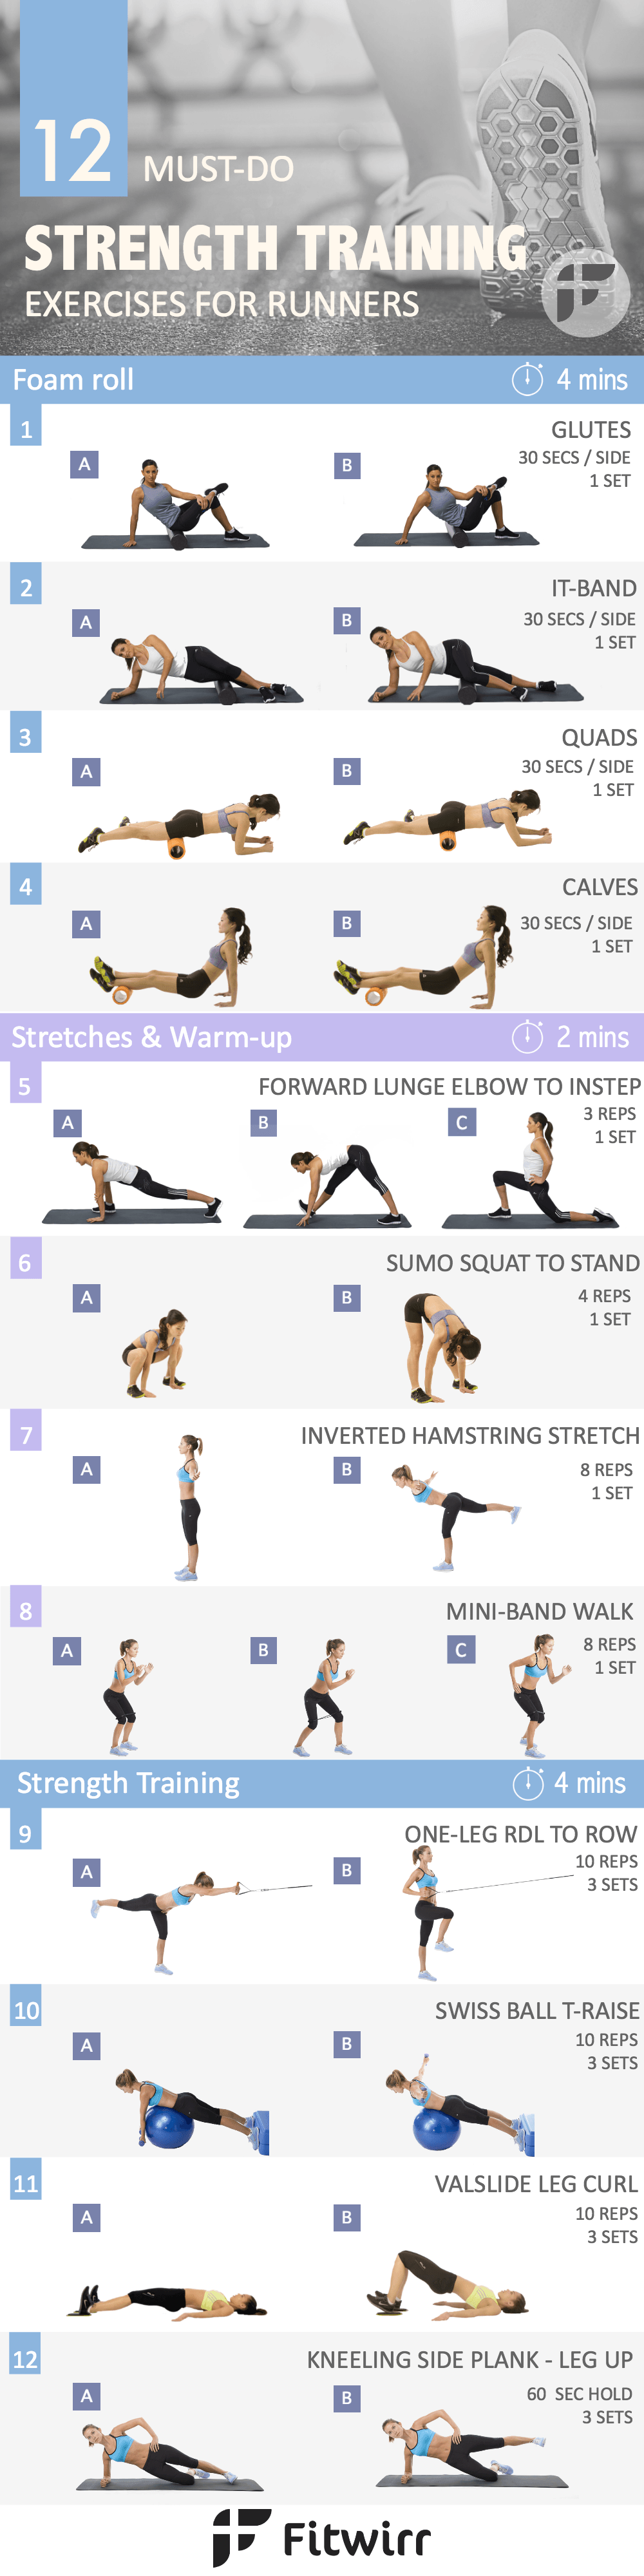 A List of 12 Best Strength Training Exercises for Runners